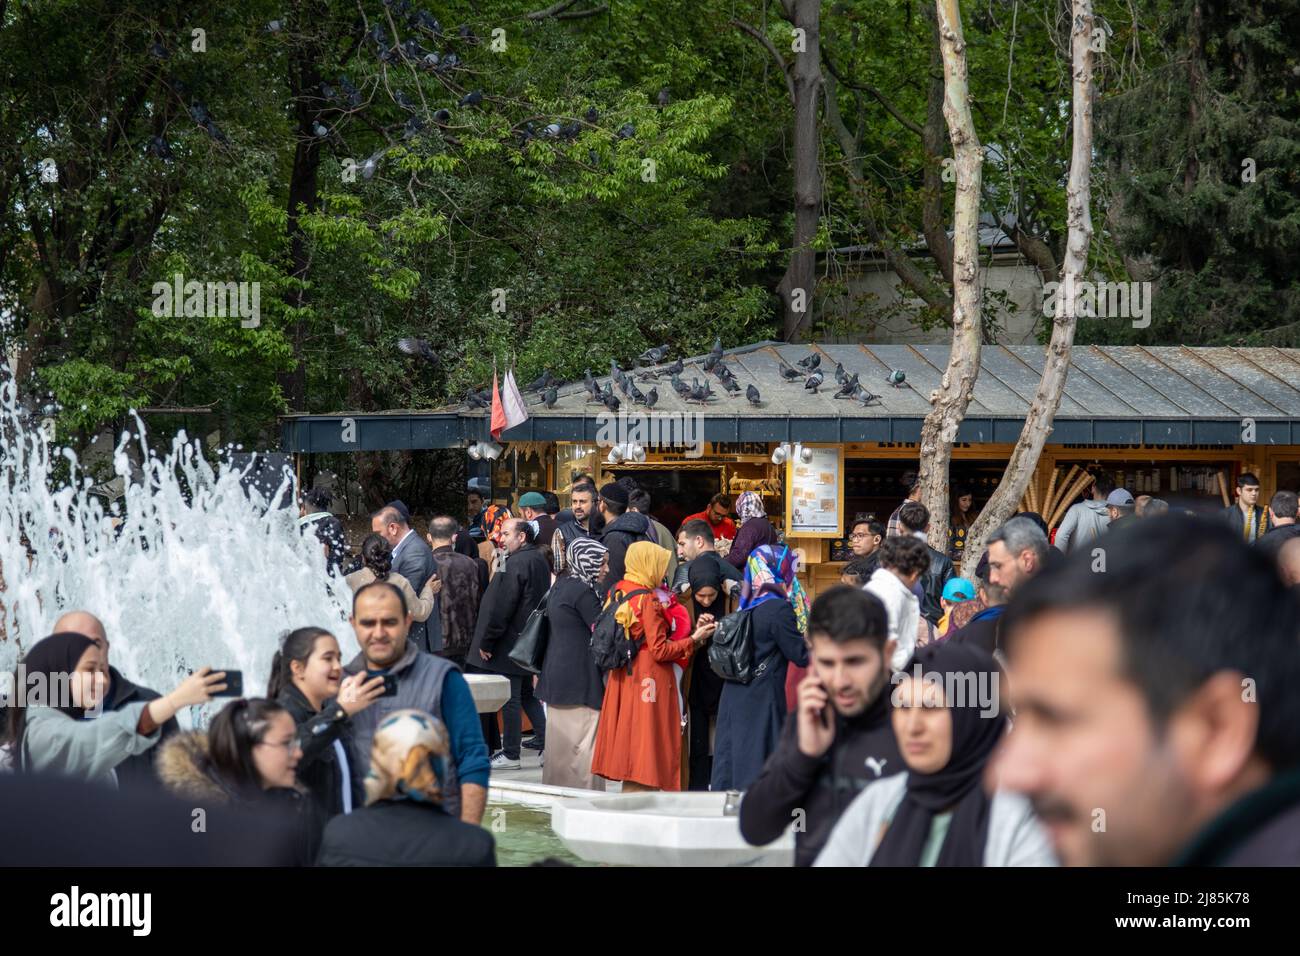 A lot of people in the Eyup Sultan Mosque courtyard, Islamic culture and place, editorial Eyüpsultan Camii Stock Photo